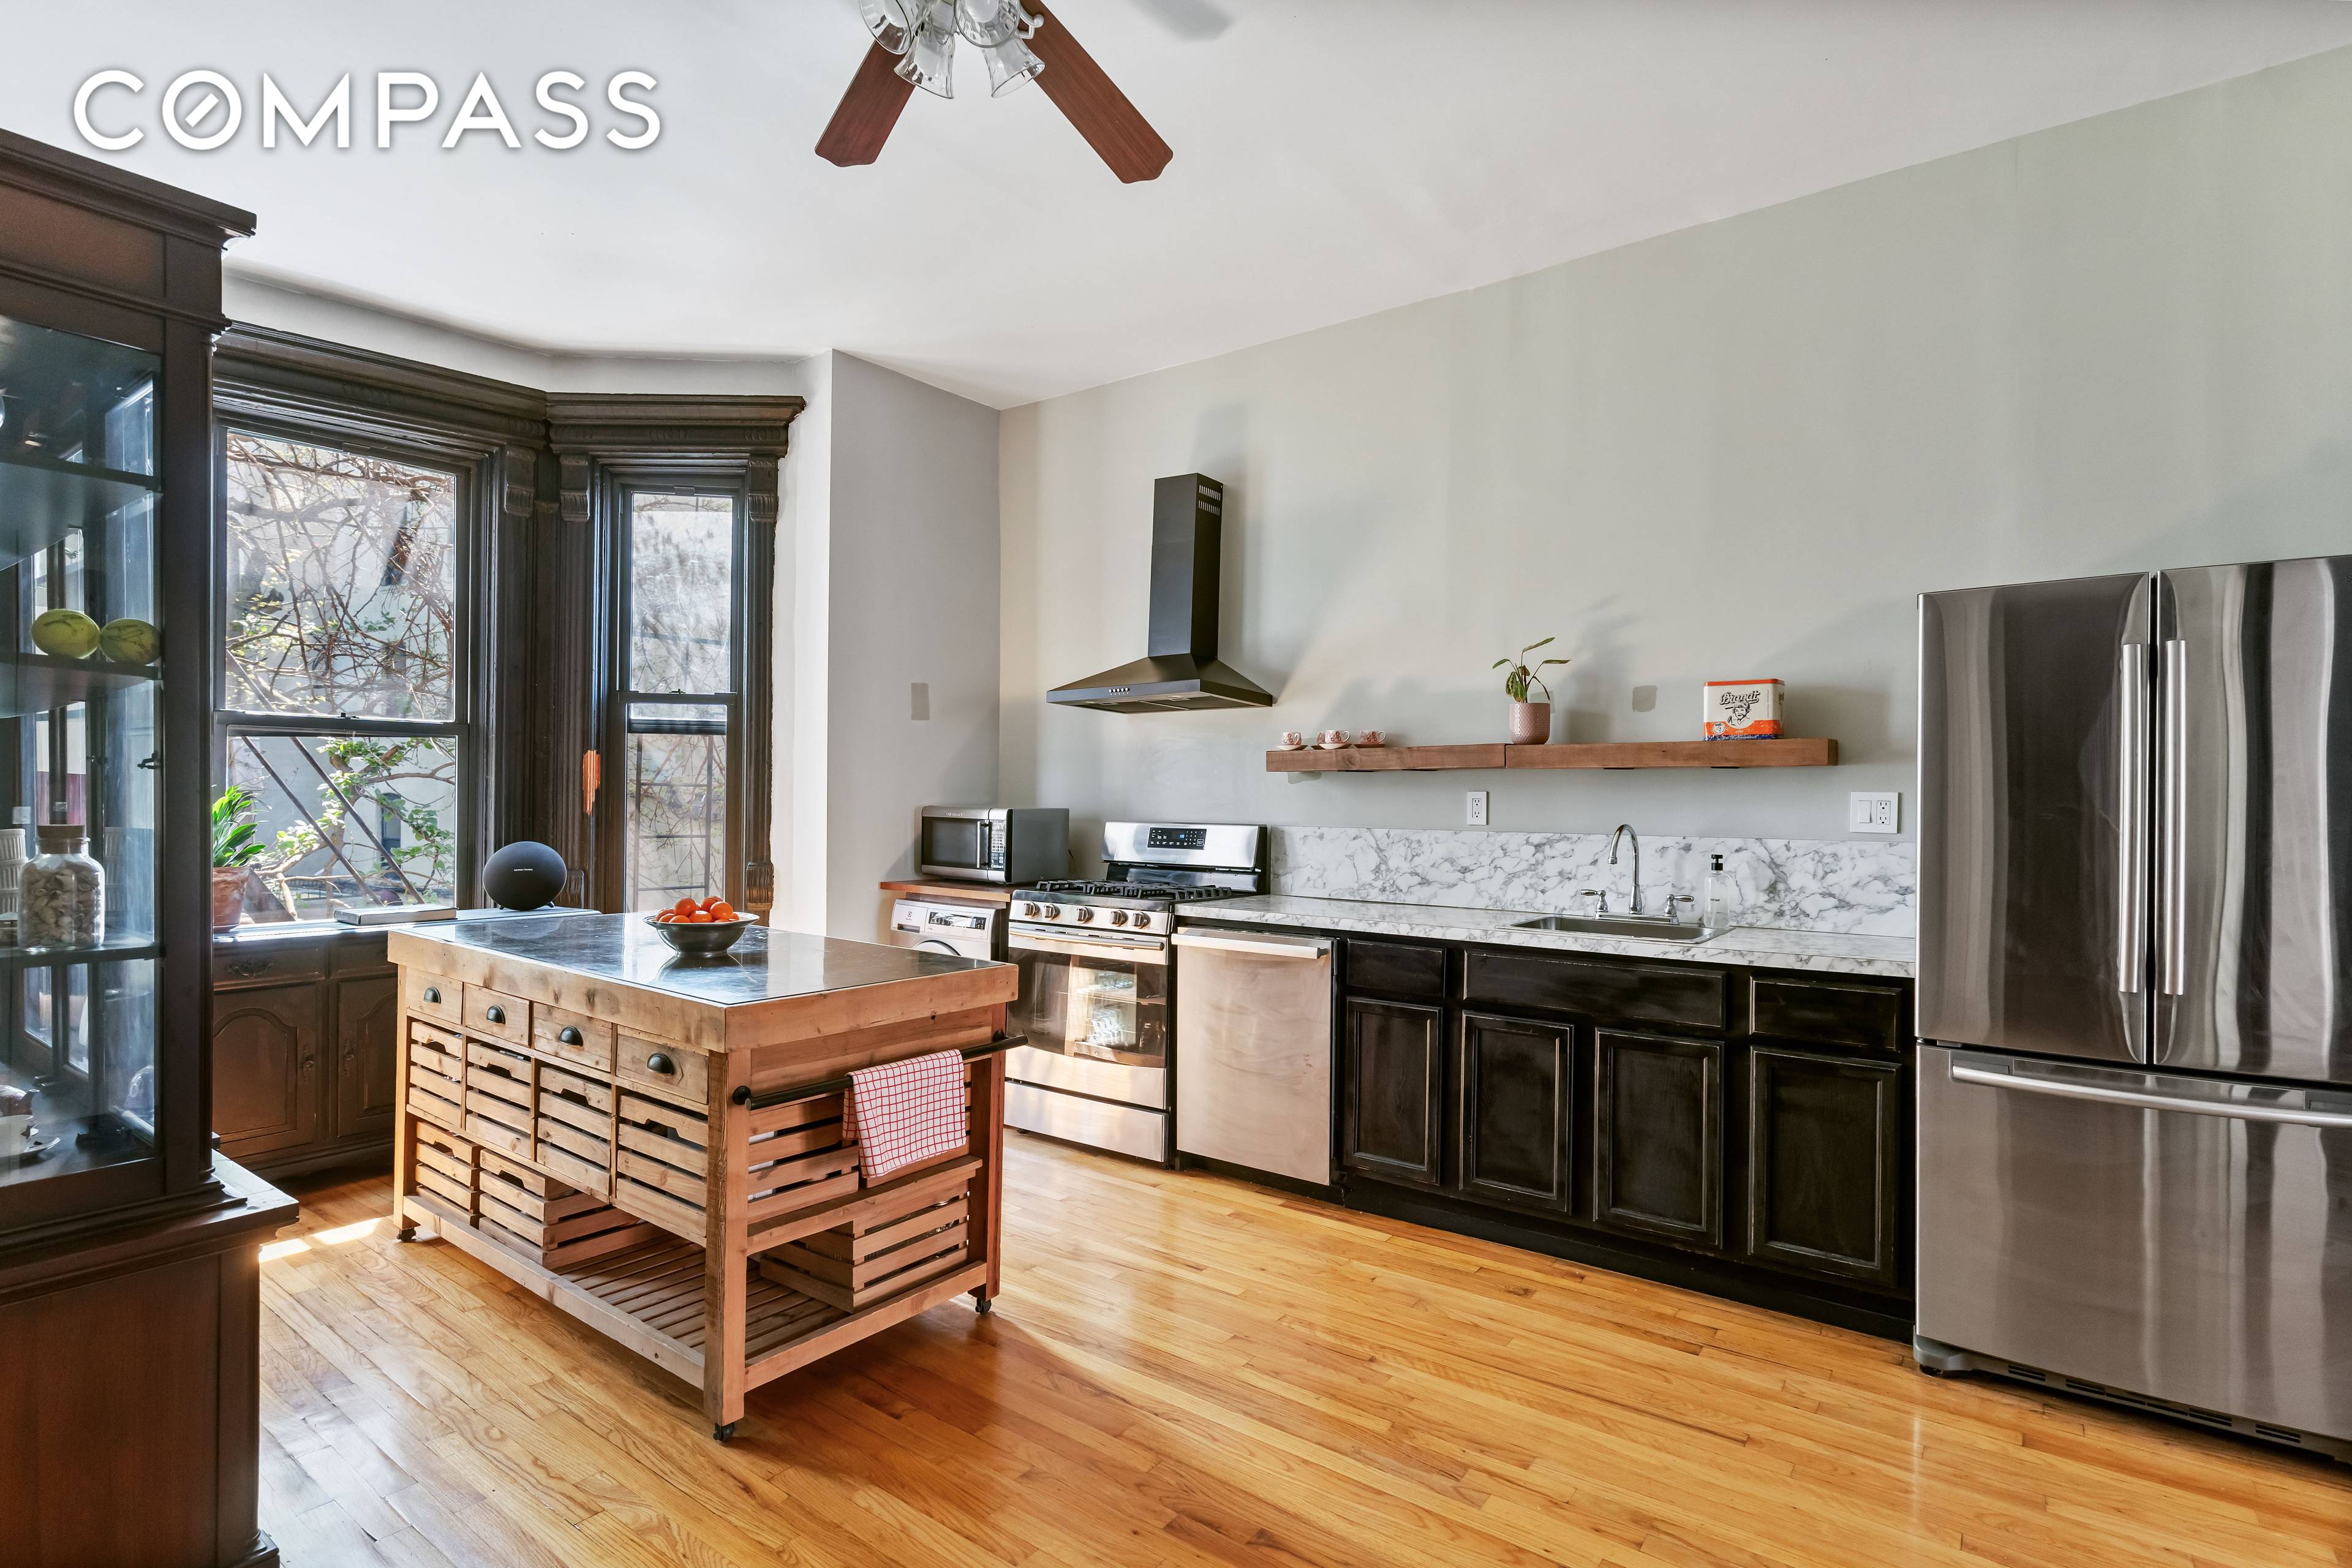 Experience turn of the century elegance in this meticulously maintained multi family townhouse nestled in the heart of Bedford Stuyvesant.